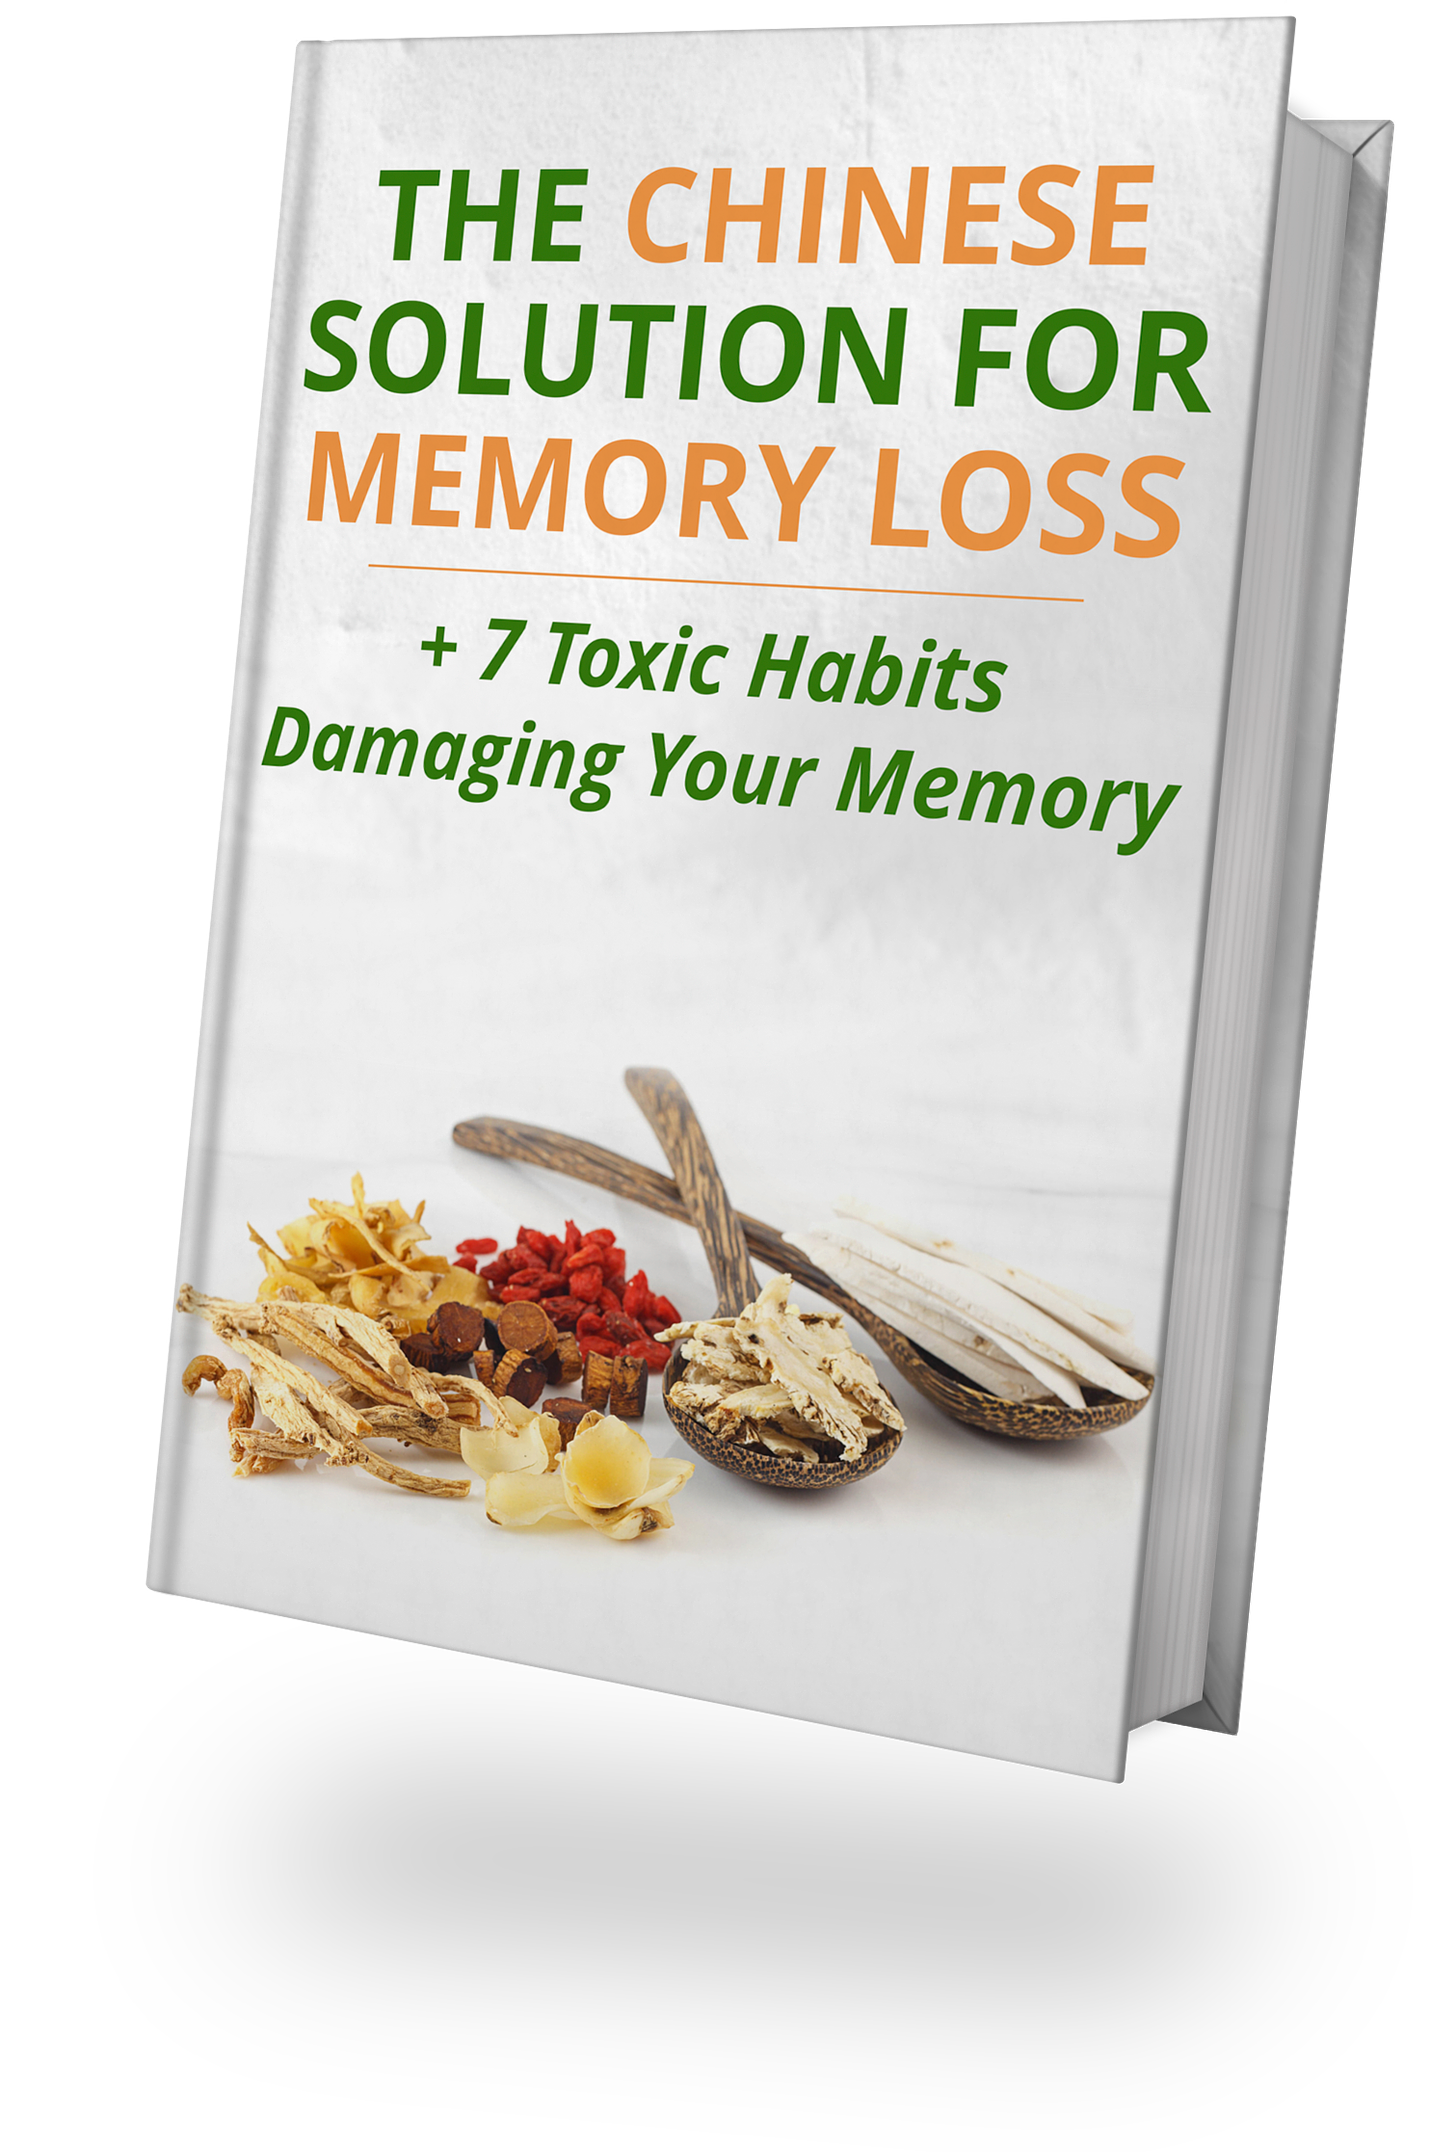 The Chinese Solution for Memory Loss--today's gift